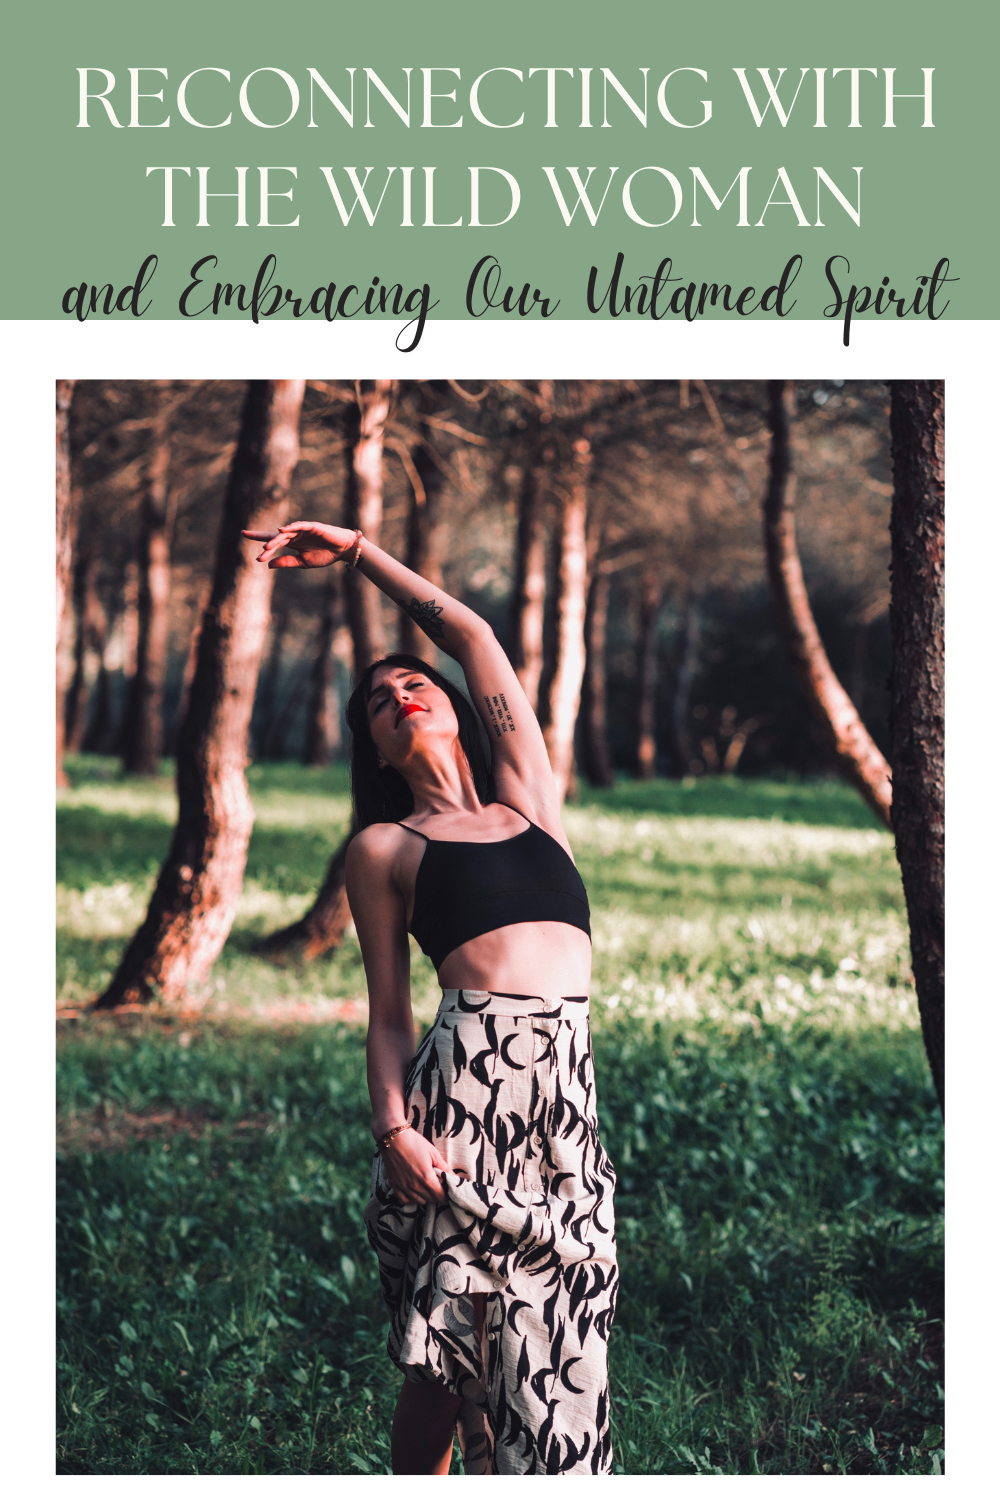 Reconnecting with the Wild Woman Within